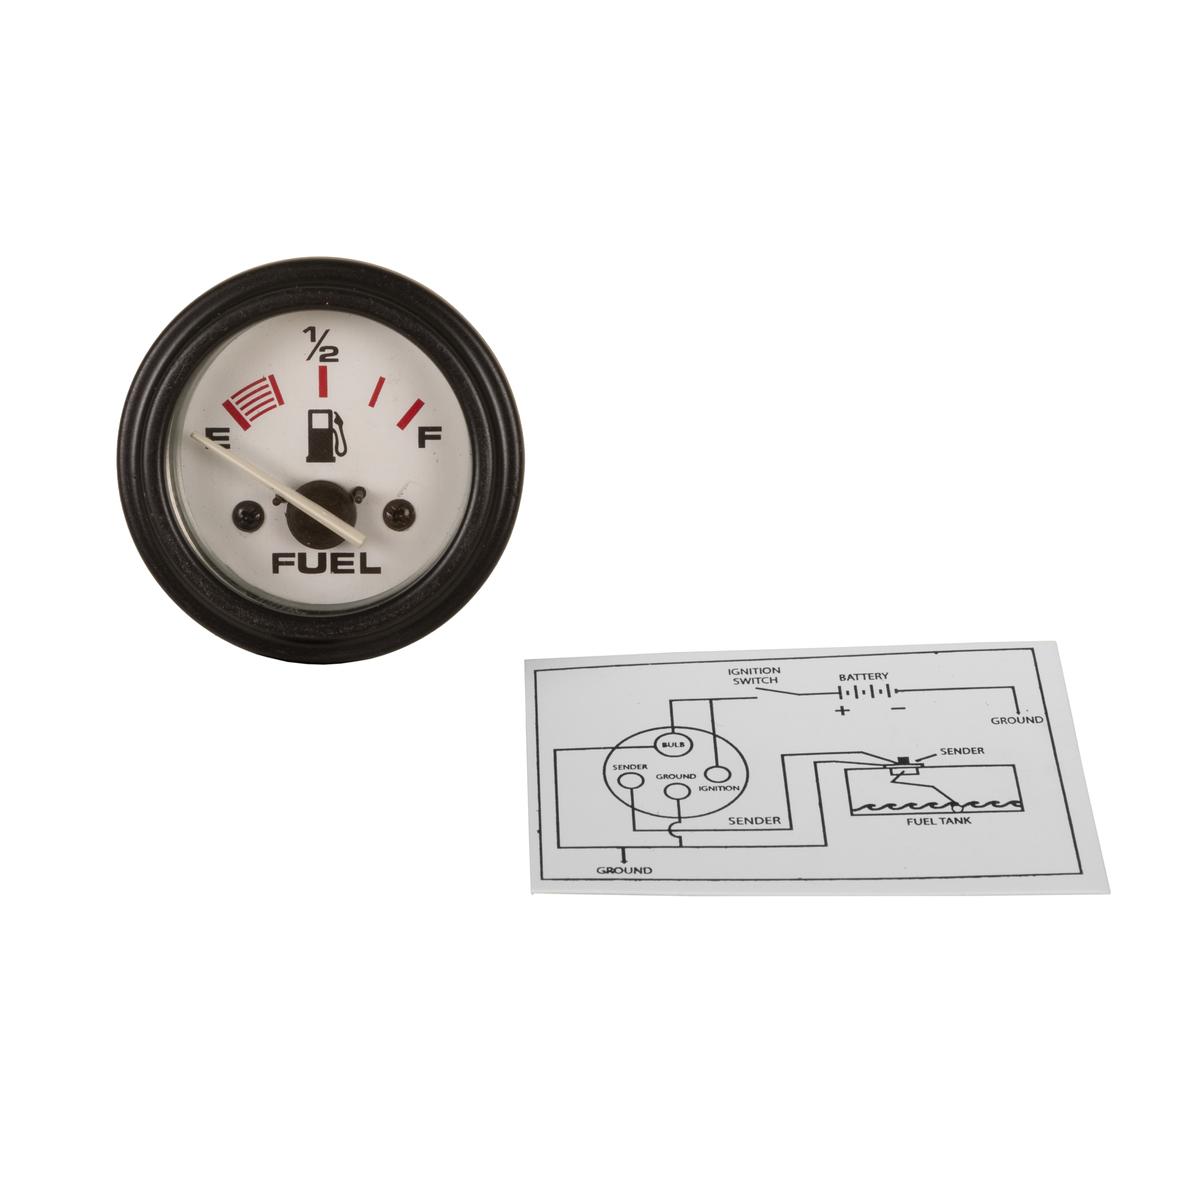 Reliance Fuel Sender and Meter Kit (White)